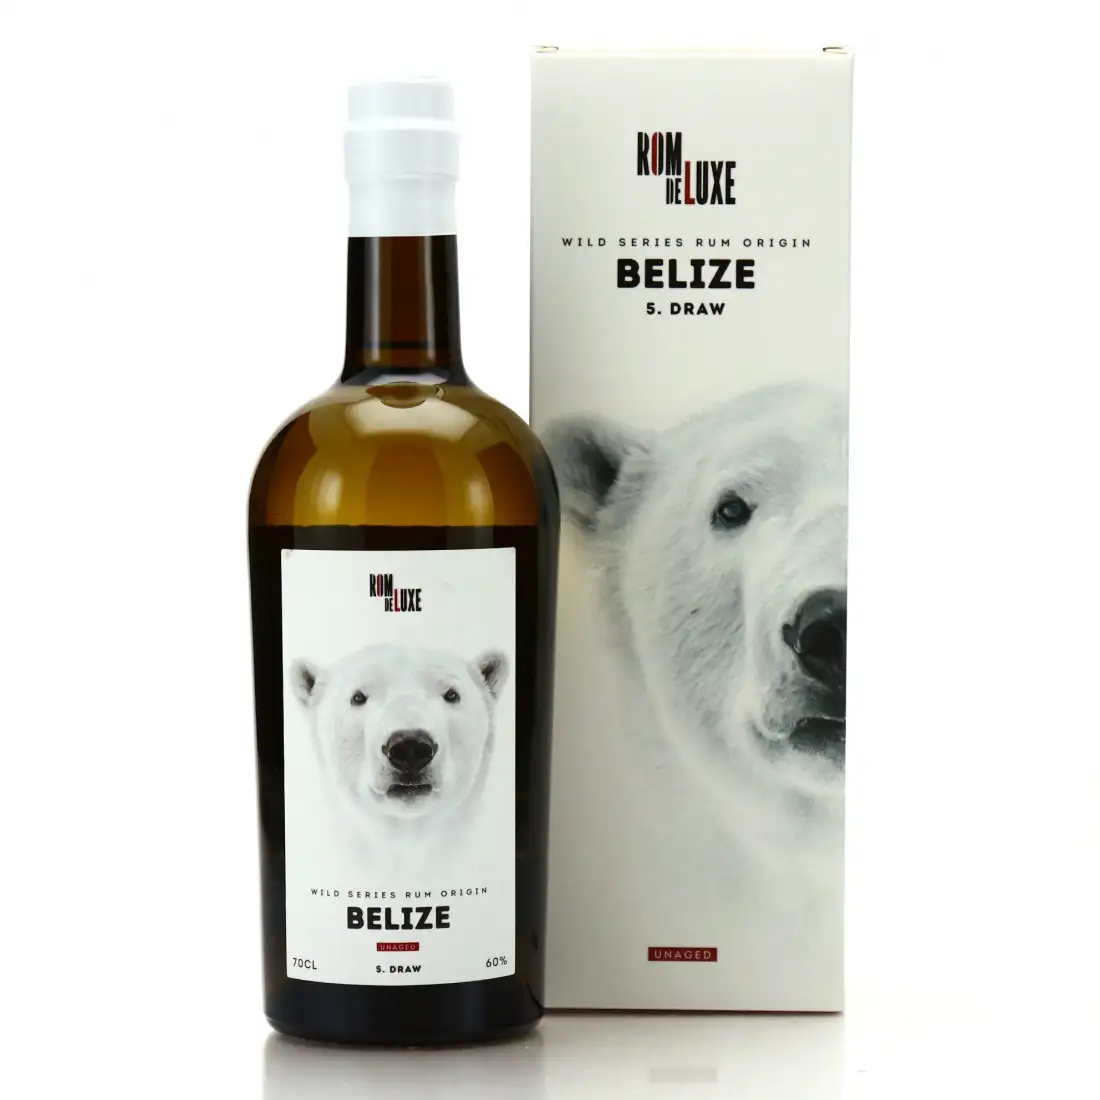 Image of the front of the bottle of the rum Wild Series Rum Origin No. 2 Belize Draw 5